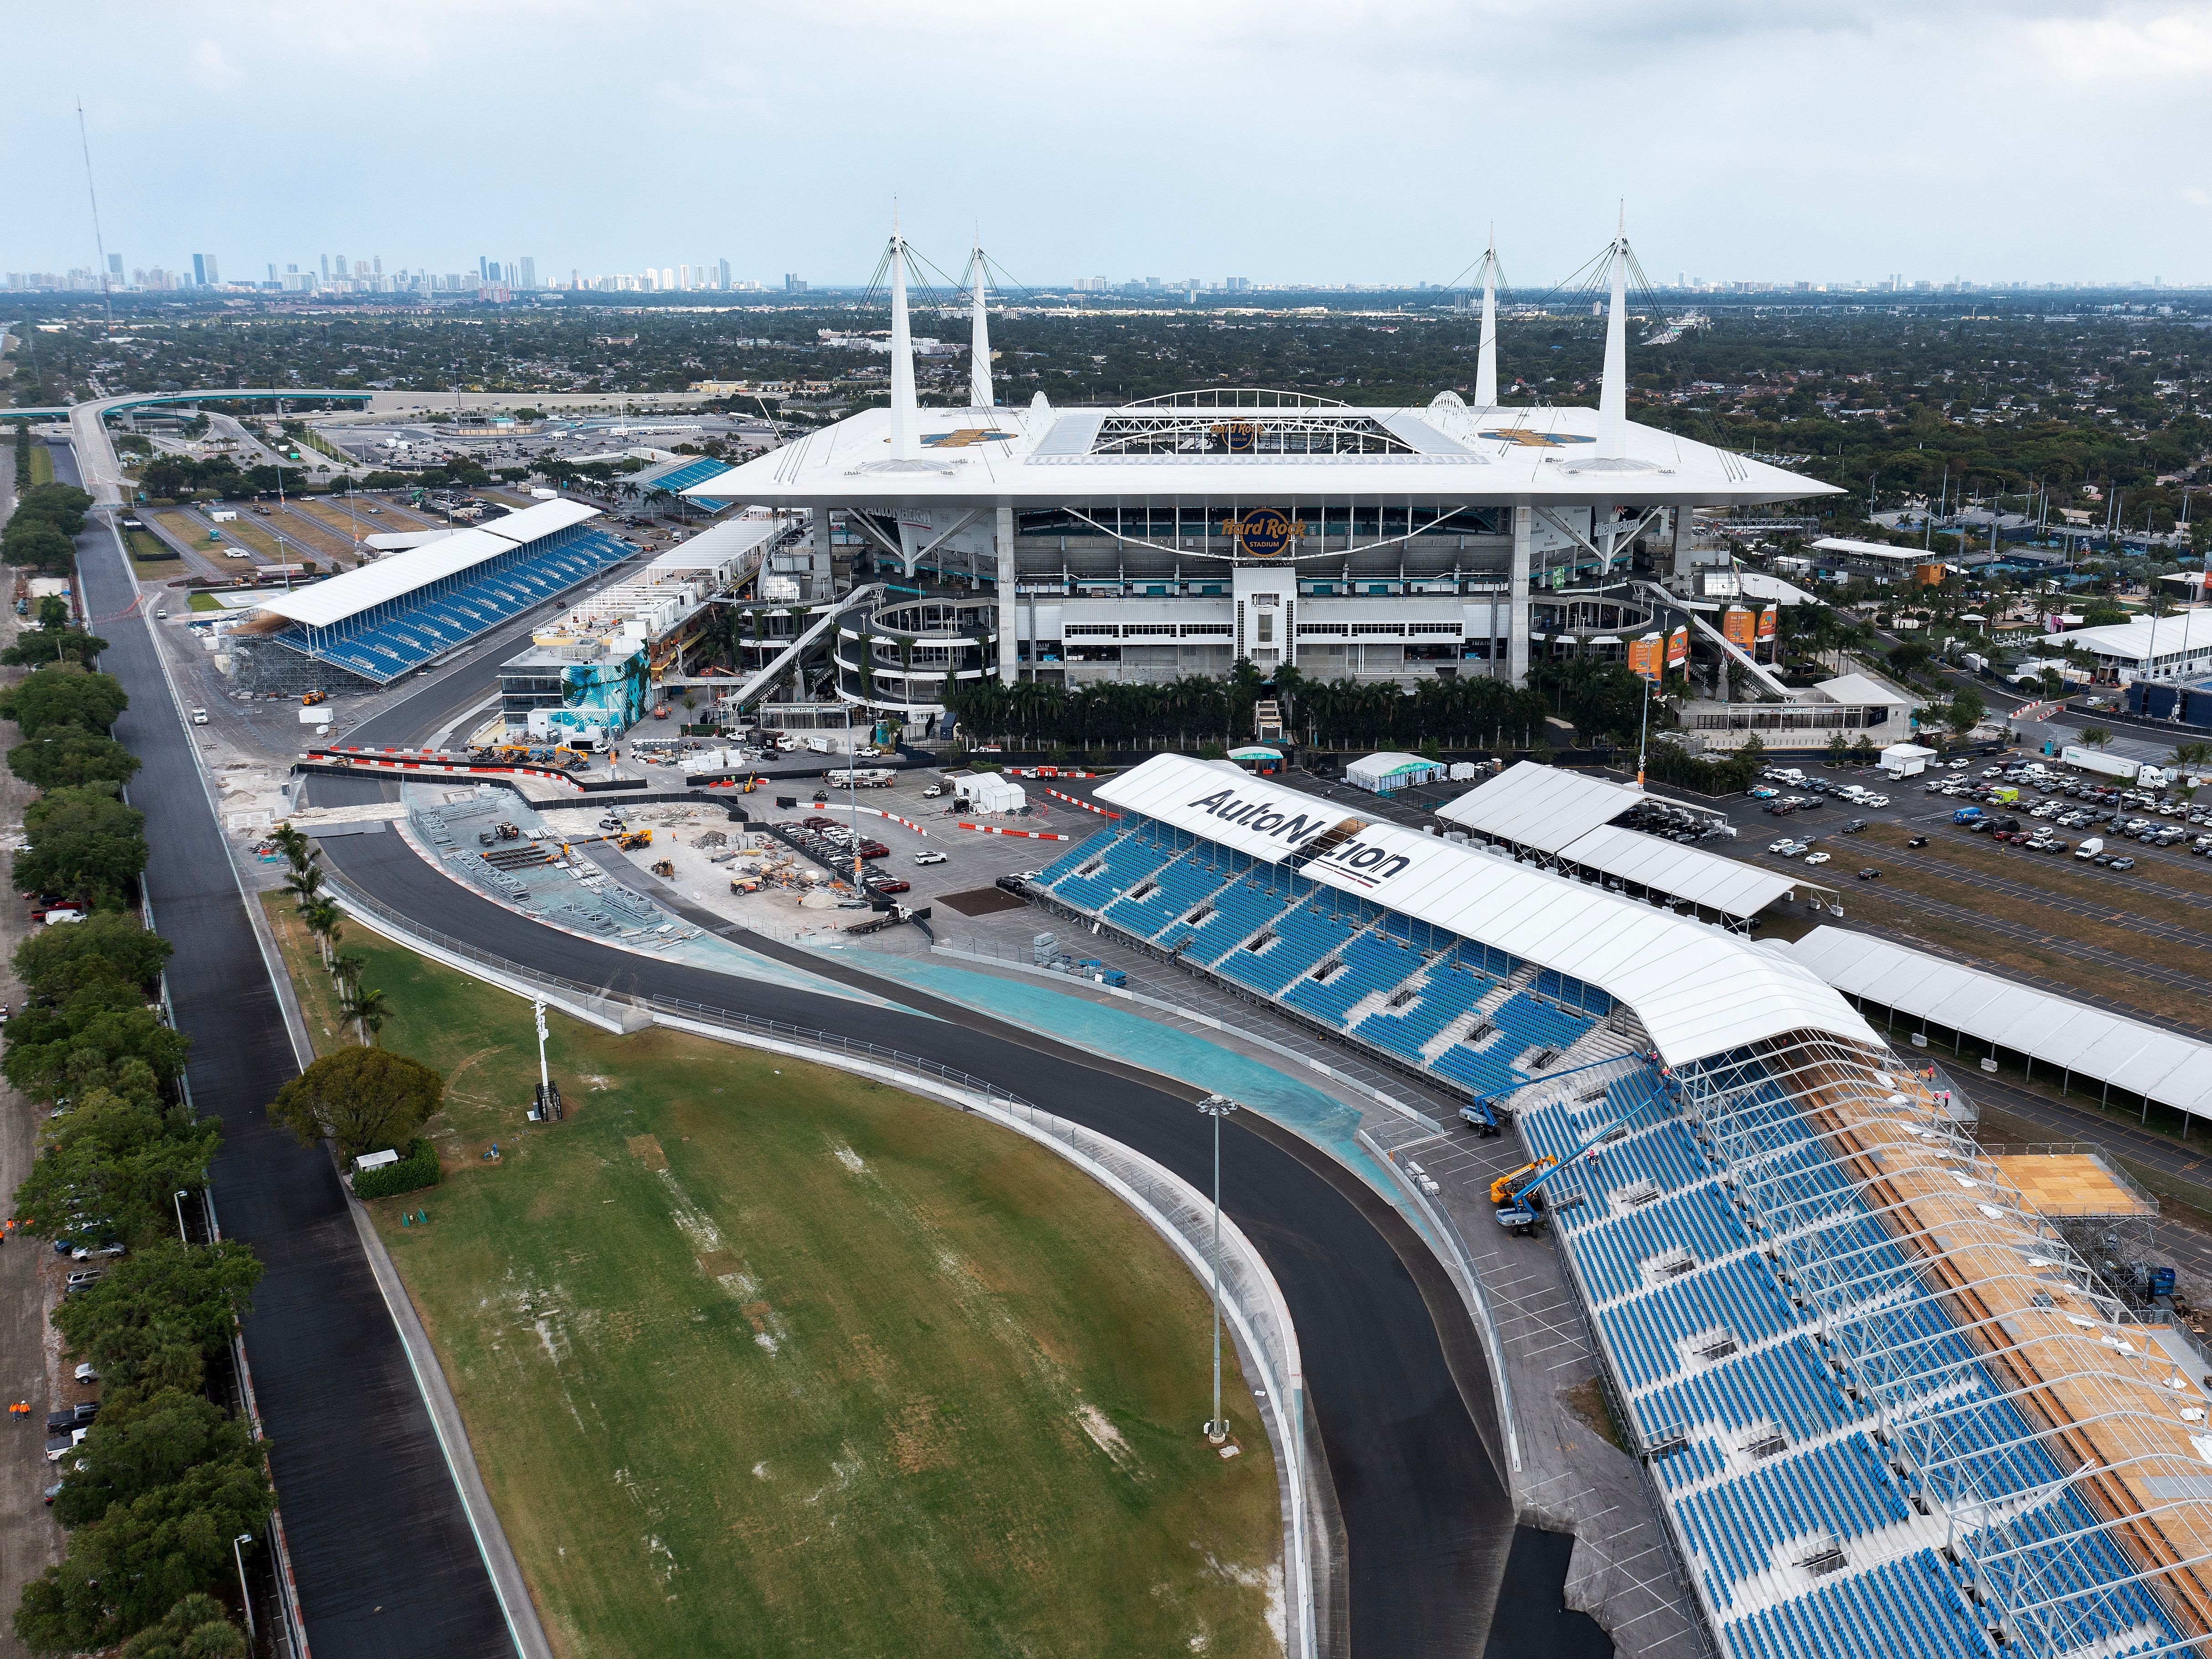 An aerial view of the Miami International Autodrome being setup where the 2023 F1 Miami Grand Prix will be held. (Photo by Al Bello/Getty Images)